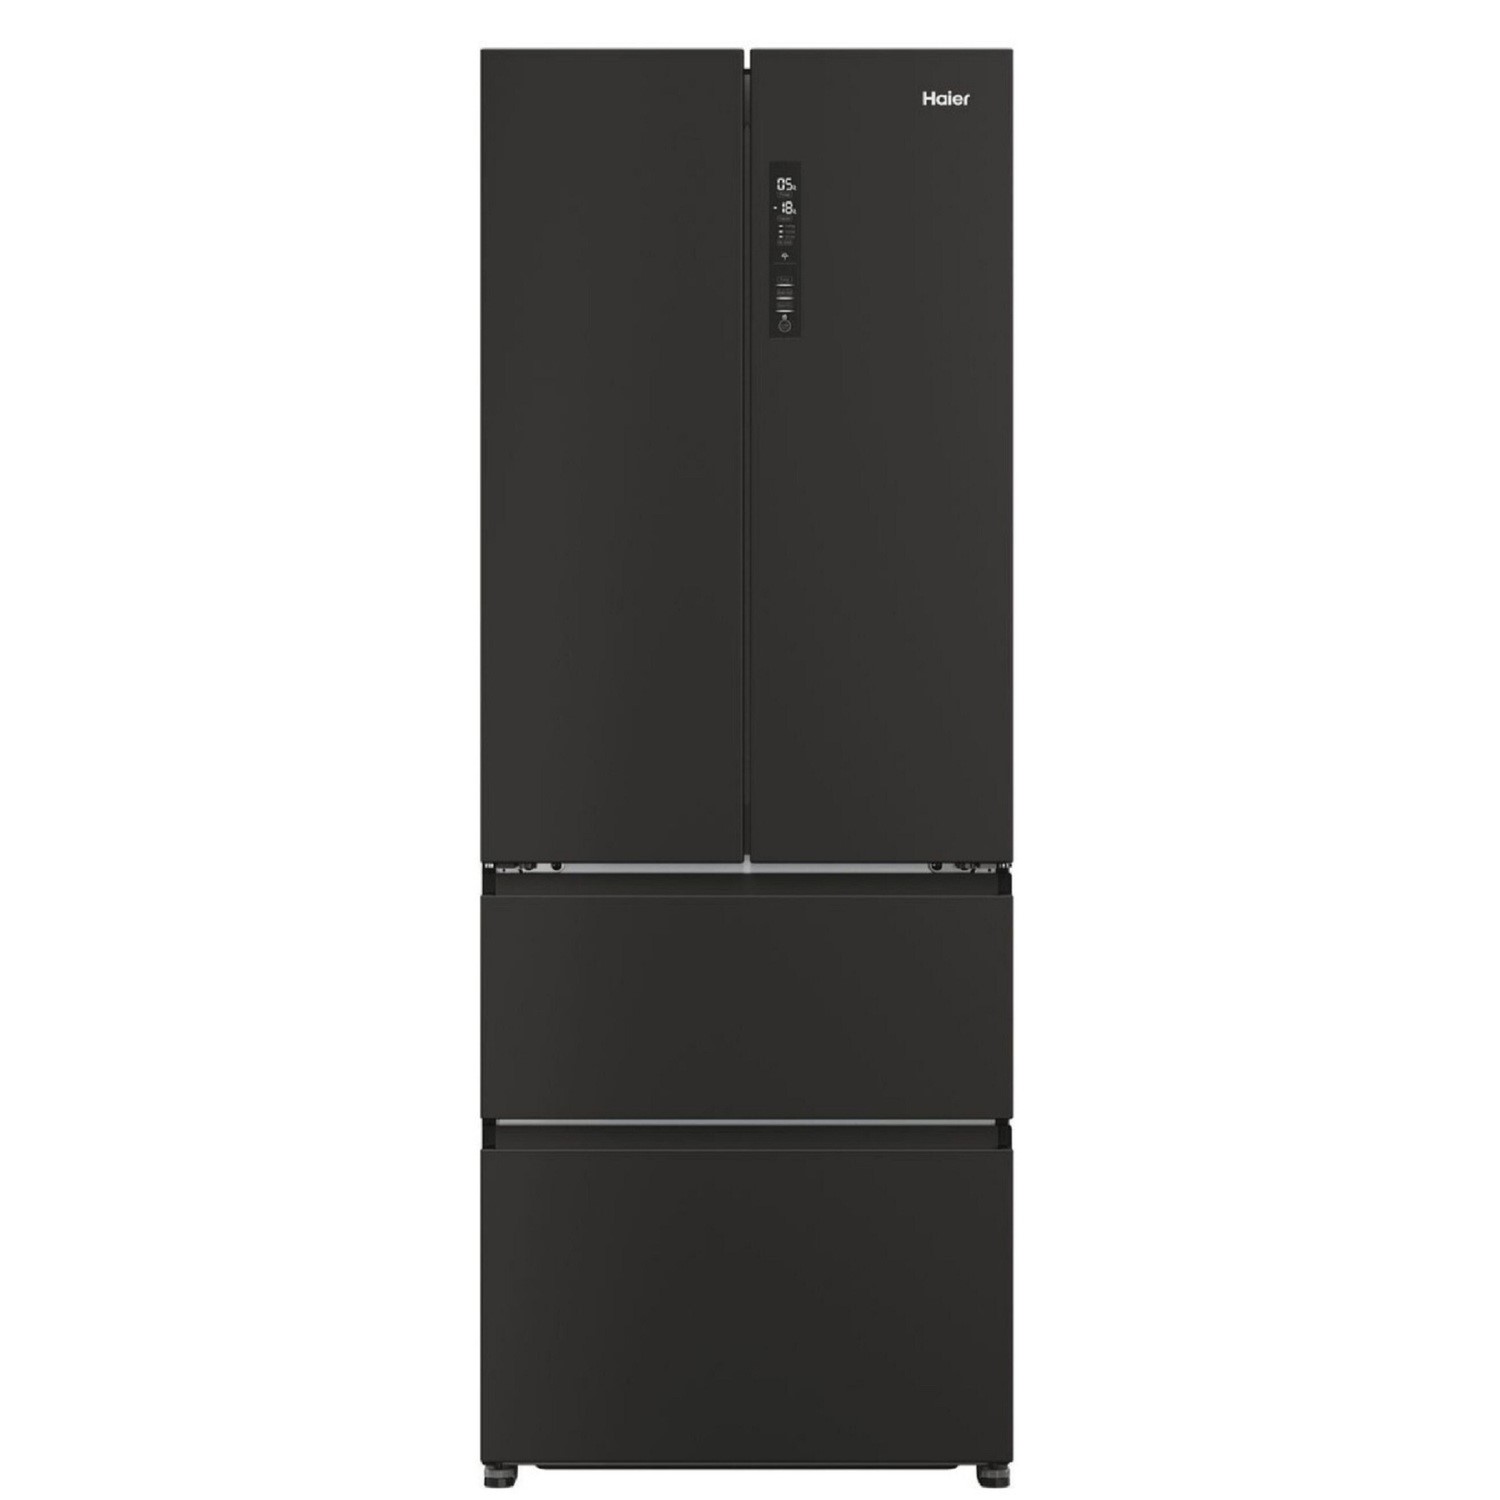 Photos - Other for Computer Haier FD 70 Series 5 444 Litre French Style American Fridge Freezer - HFR5 